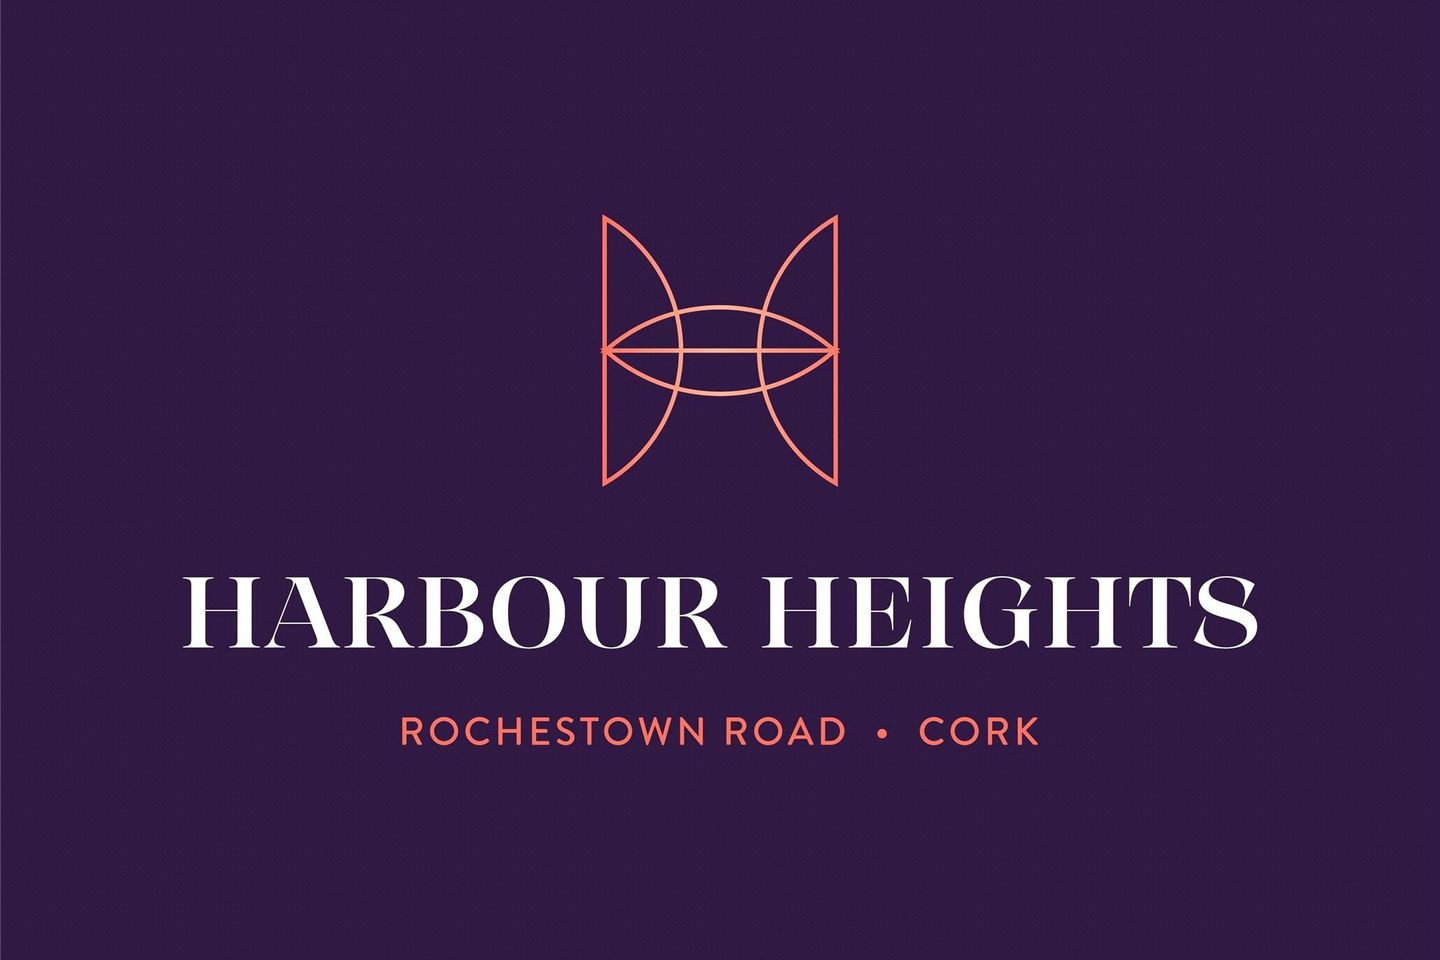 Type A5 - Three Bed Semi Detached, Harbour Heights, Type A5 - Three Bed Semi Detached, Harbour Heights, Rochestown, Co. Cork